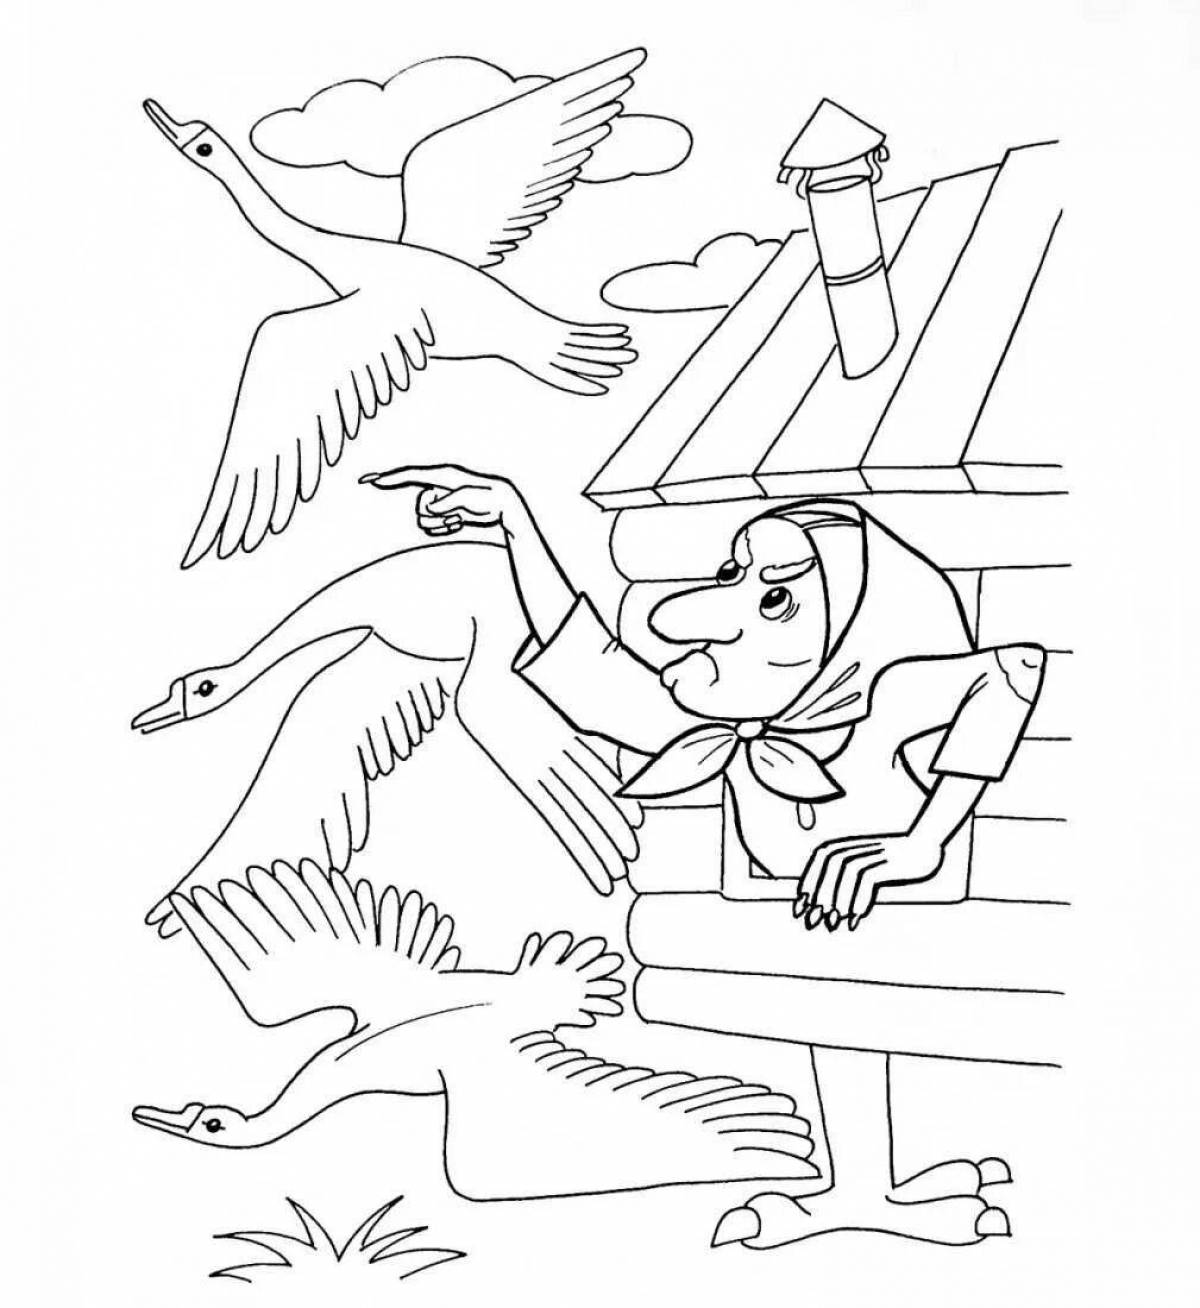 Fun geese and swans coloring book for kids